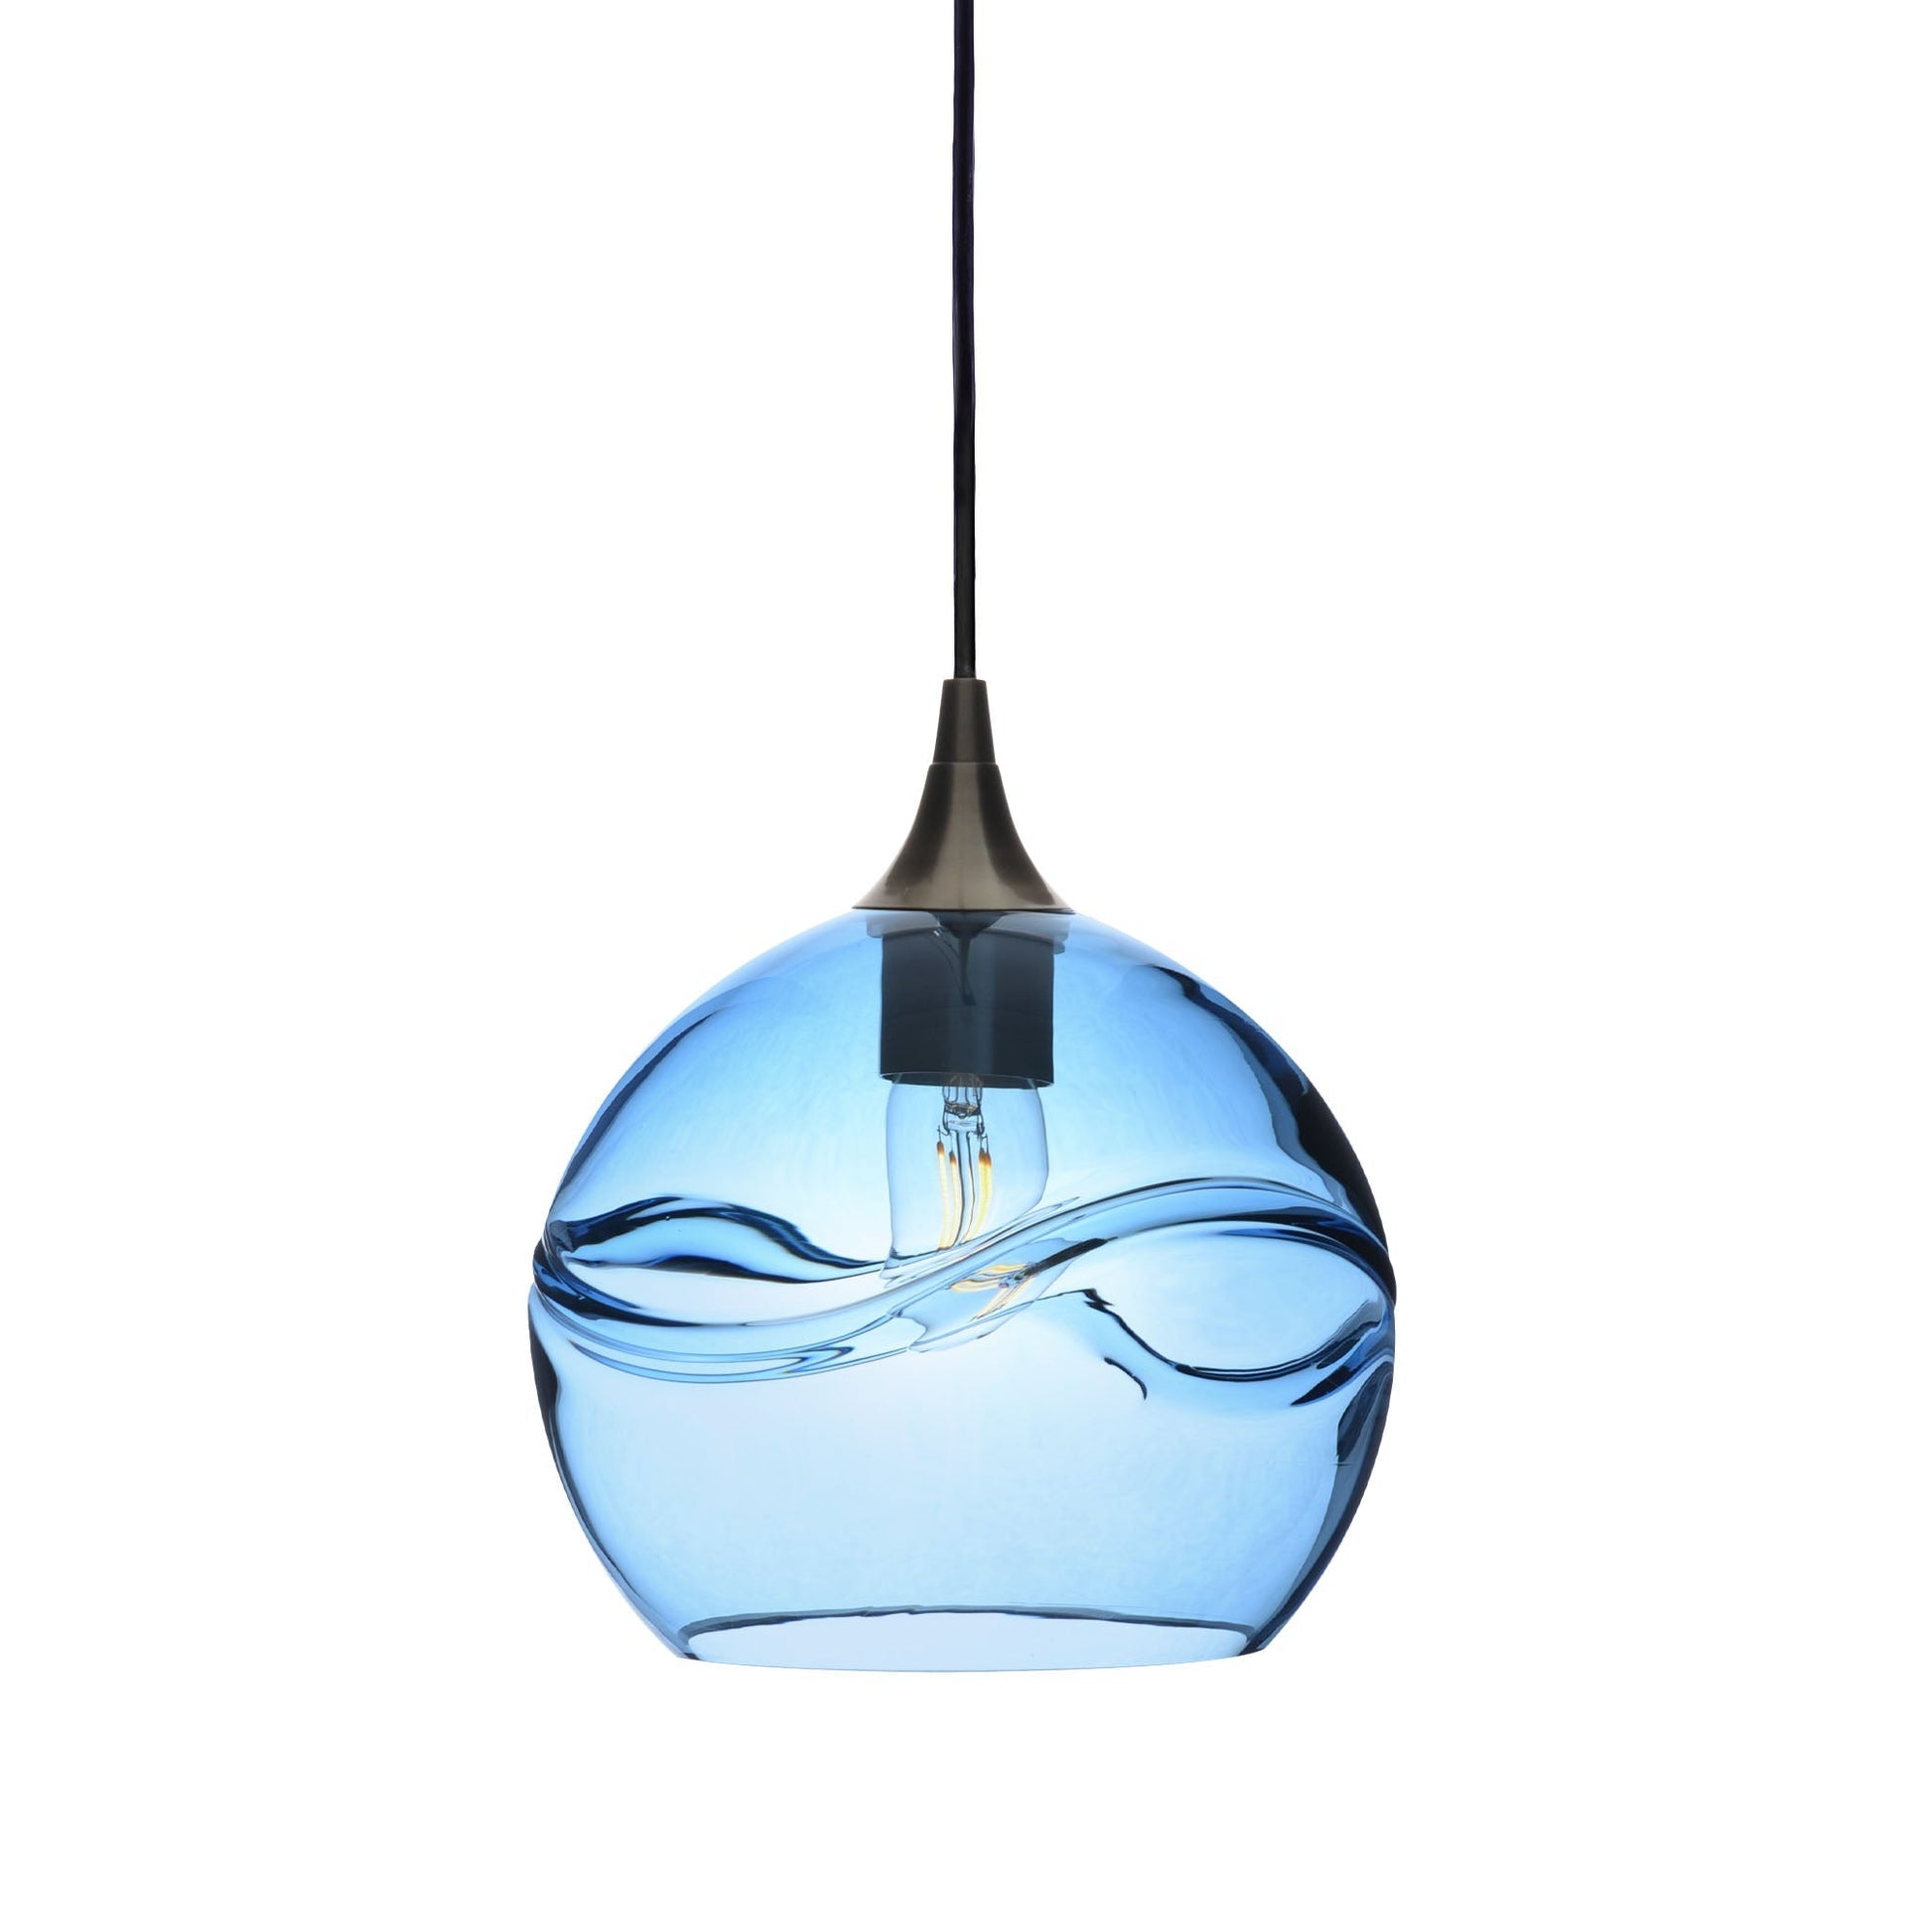 768 Swell: Single Pendant Light-Glass-Bicycle Glass Co - Hotshop-Steel Blue-Antique Bronze-Bicycle Glass Co